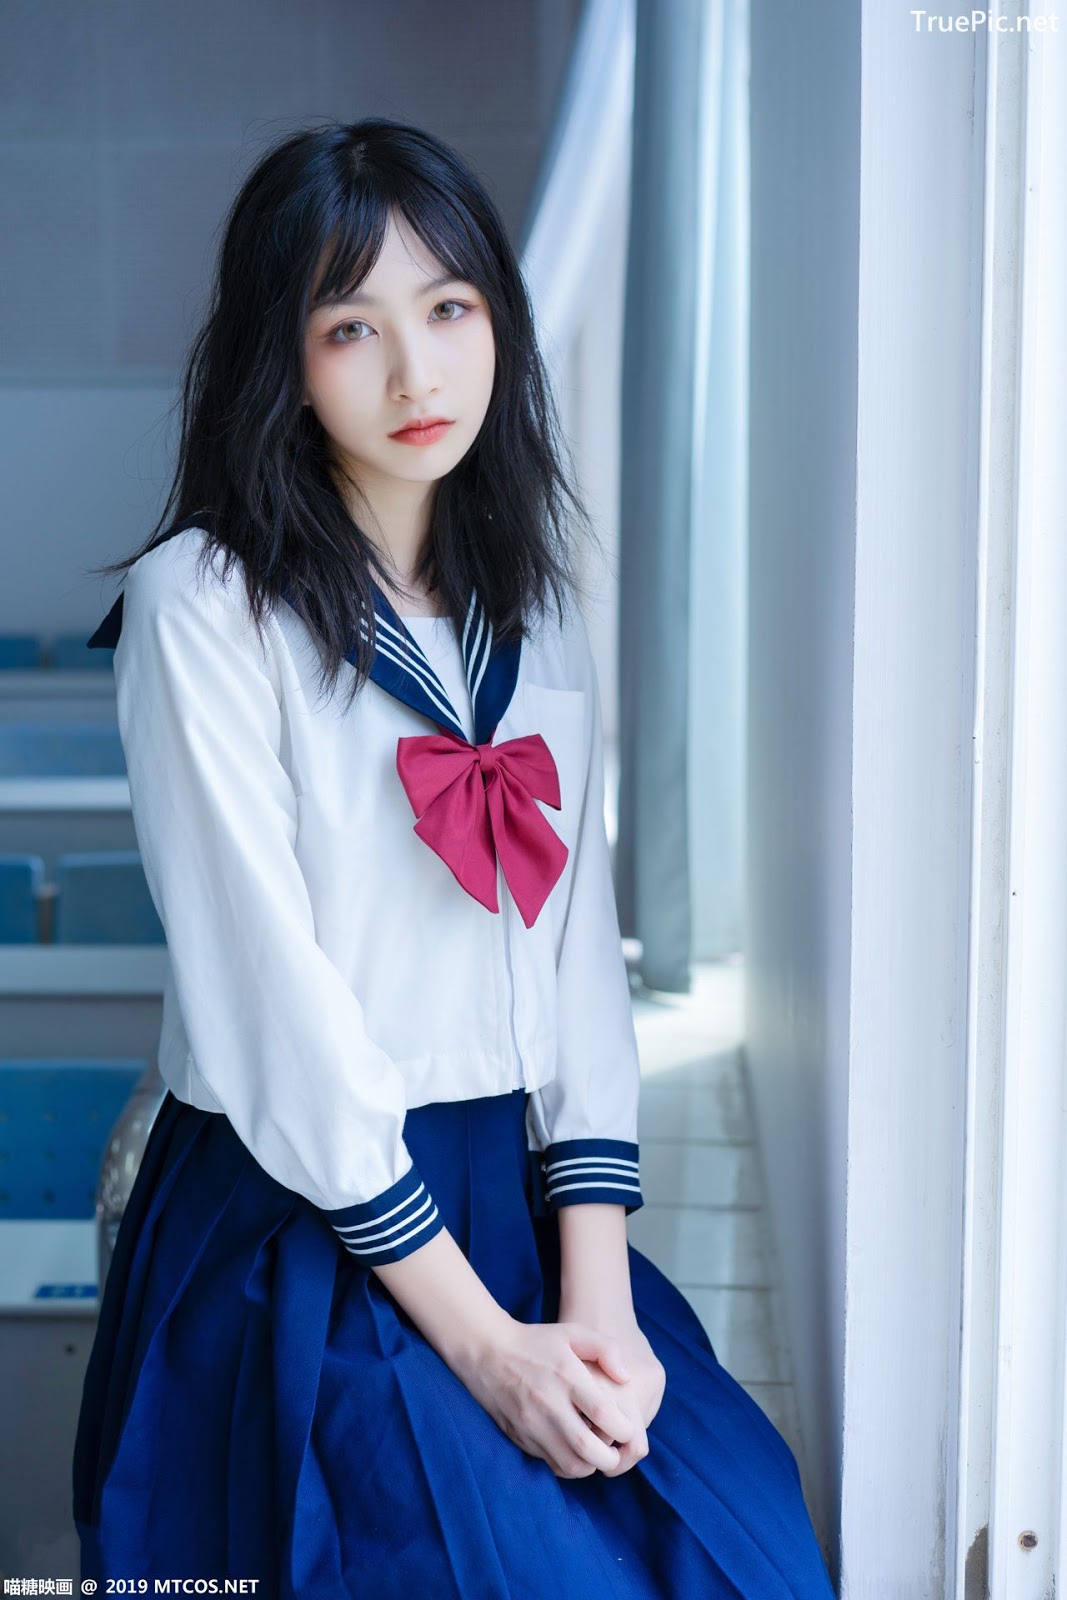 Image MTCos 喵糖映画 Vol.014 – Chinese Cute Model With Japanese School Uniform - TruePic.net- Picture-37